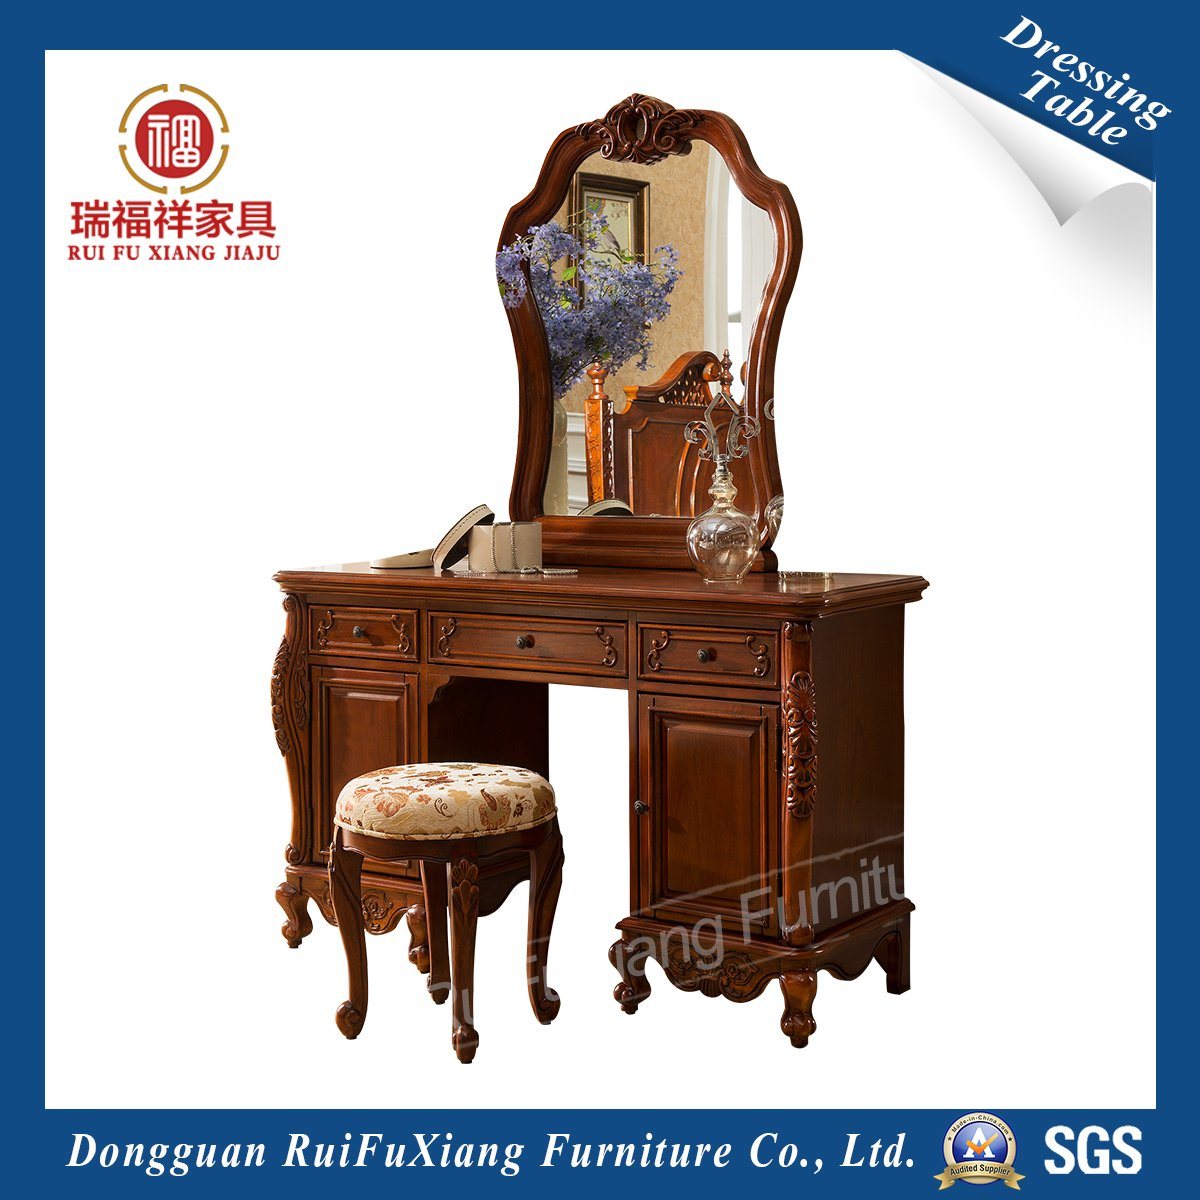 Ruifuxiang Dressing Table with Mirror (E205)